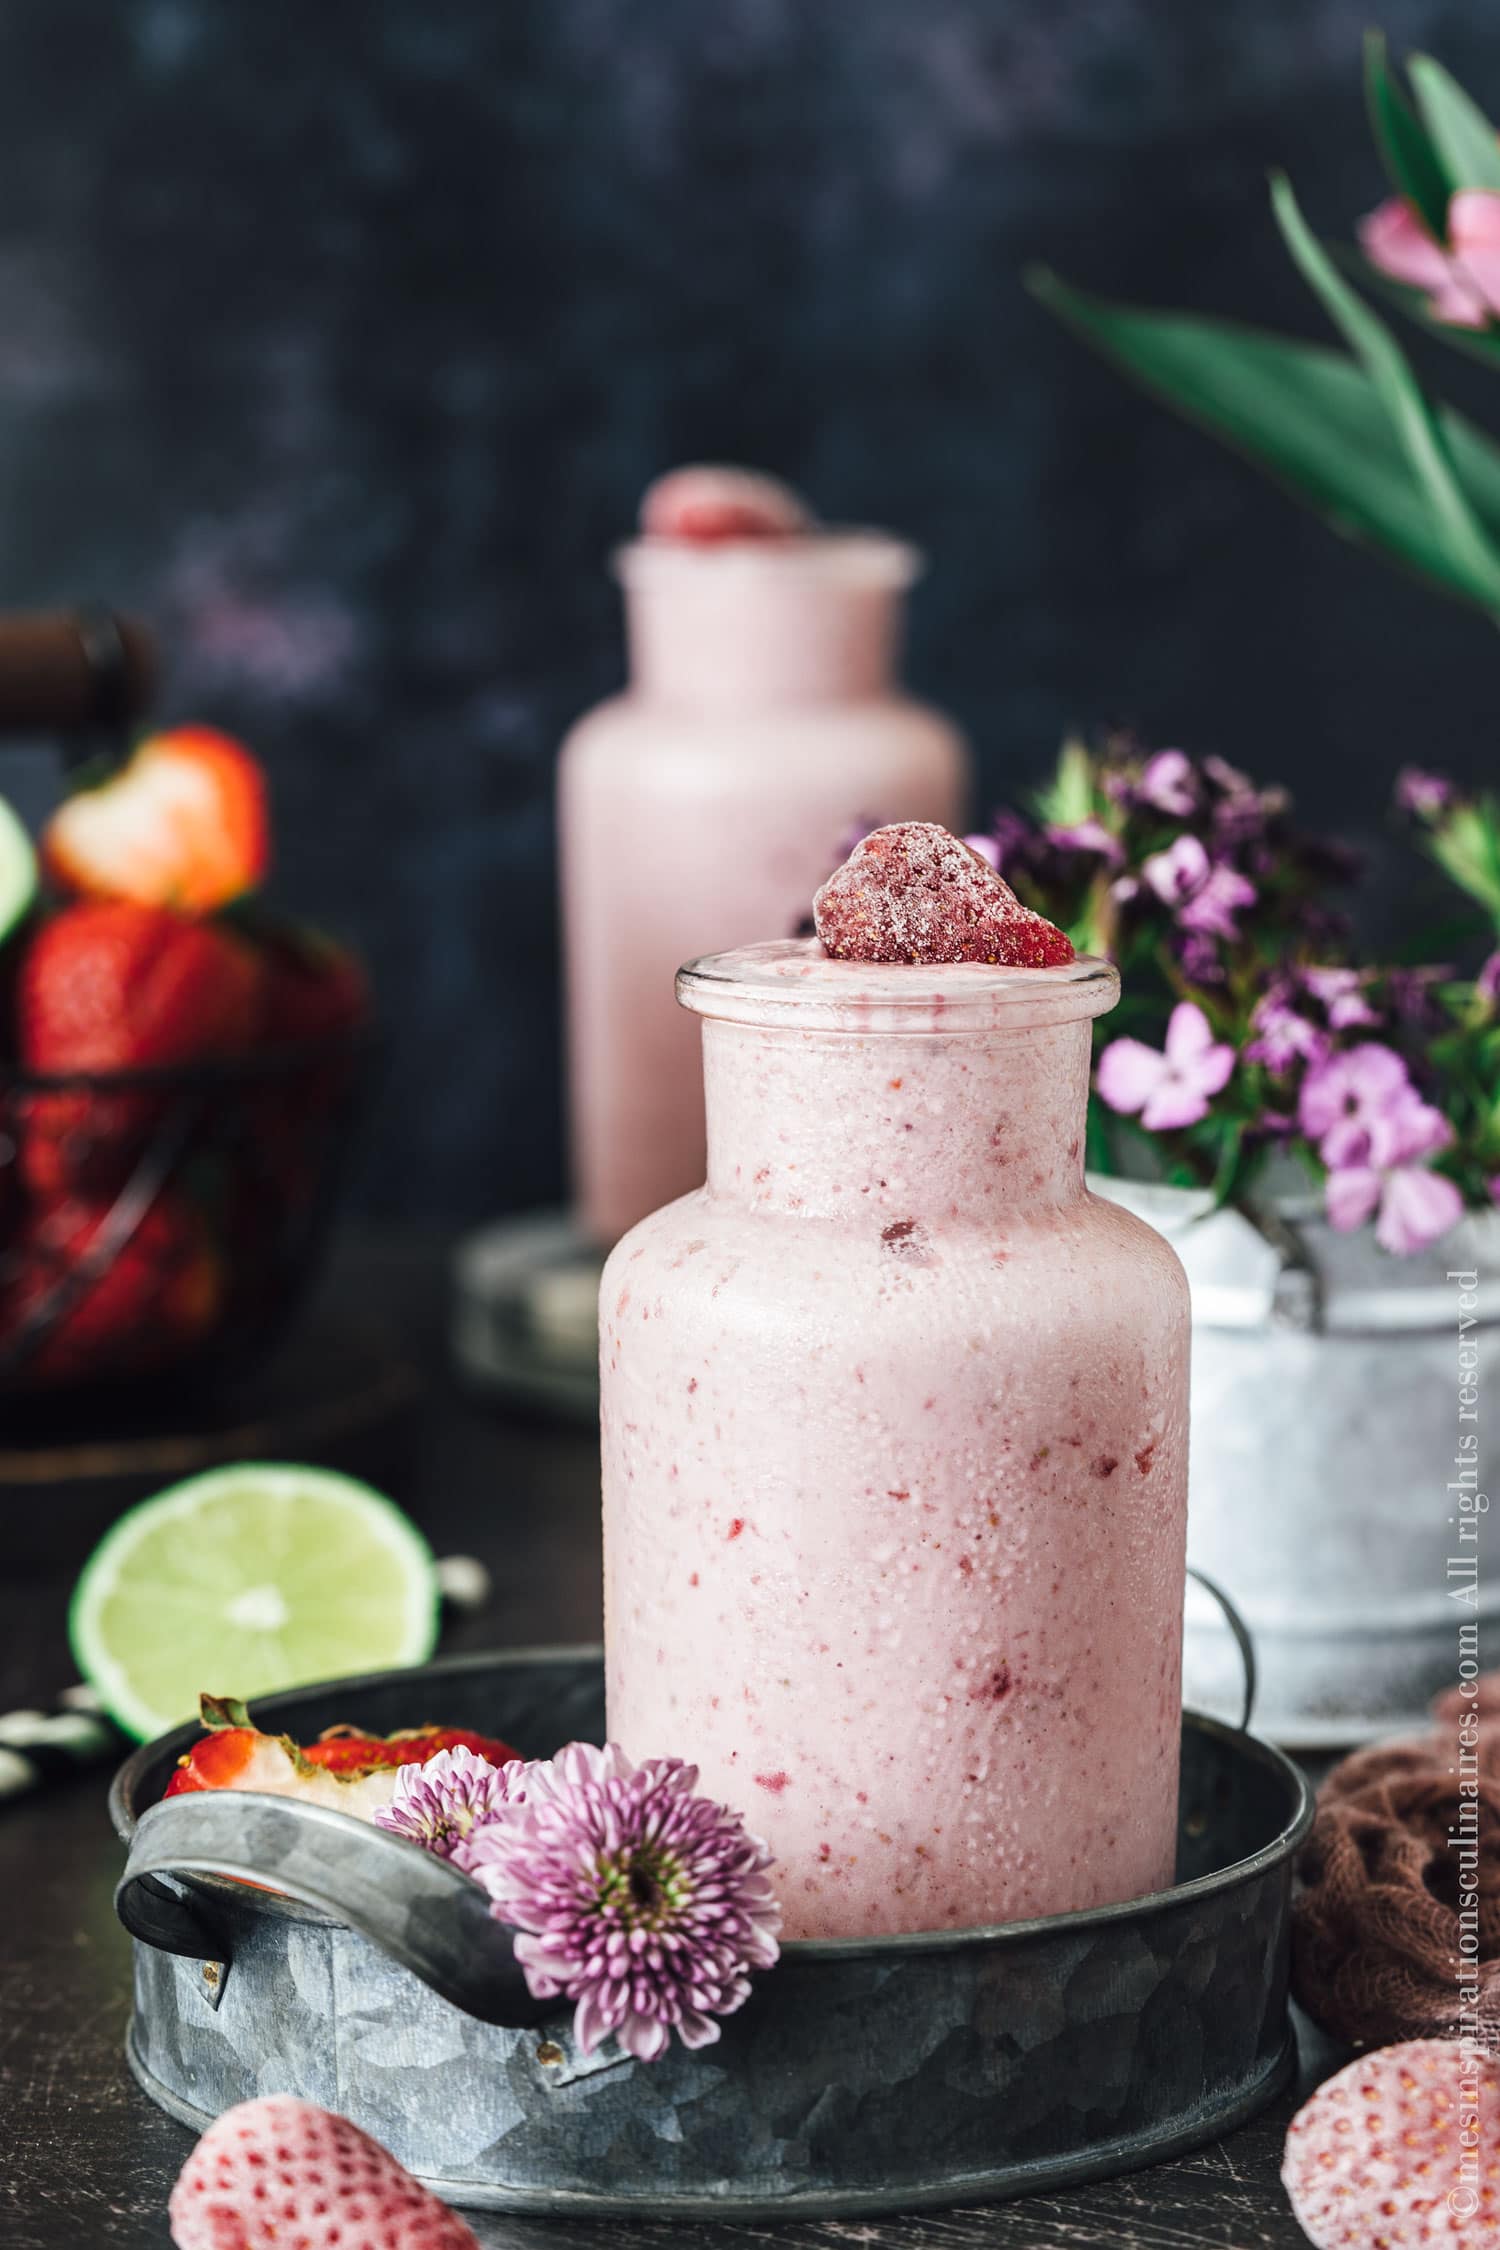 Smoothie fraise rhubarbe, recette facile